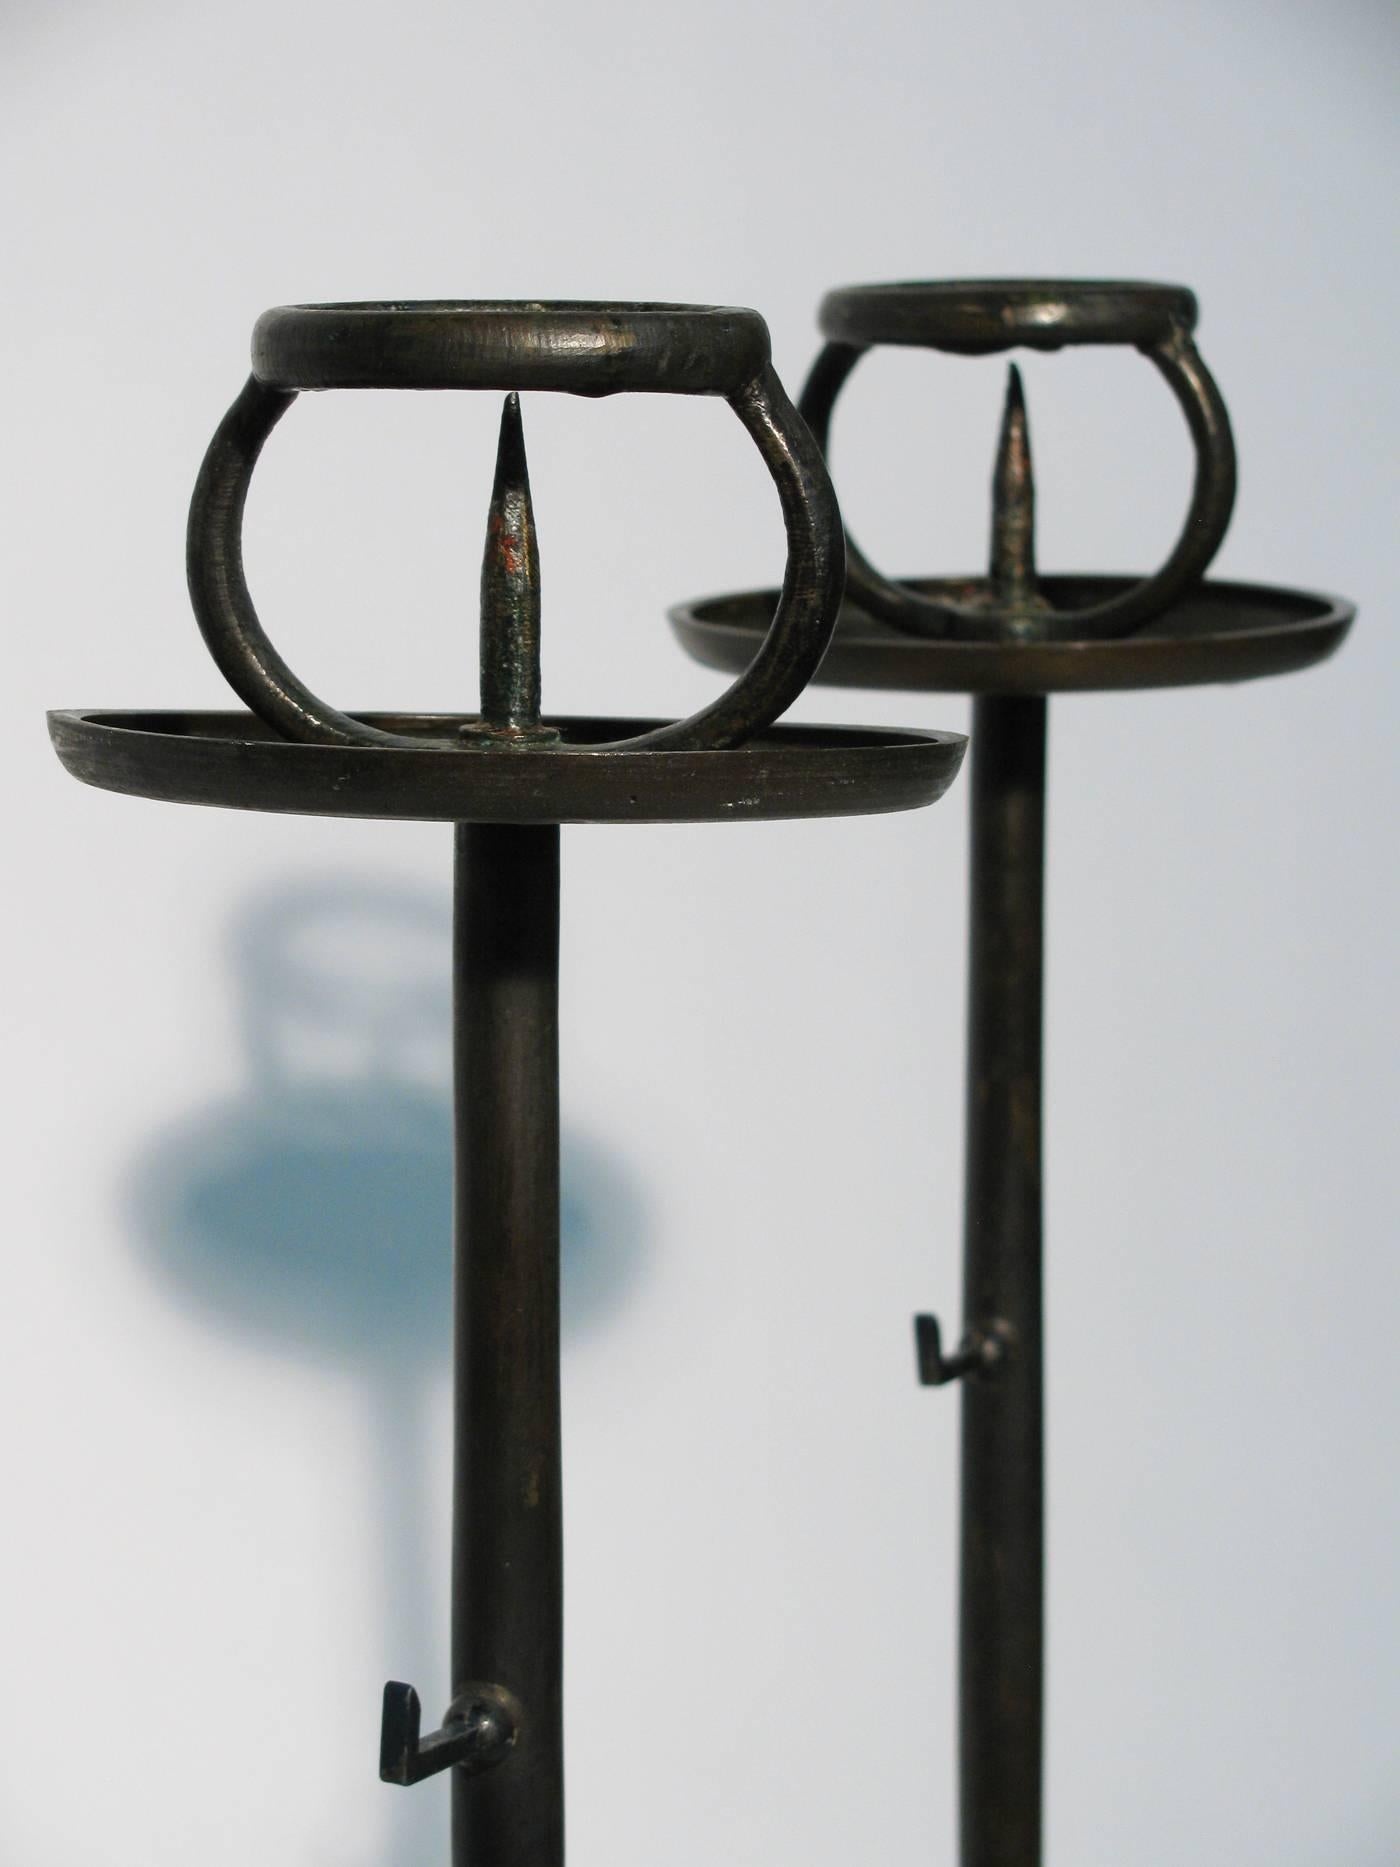 A stunning pair of Meiji period (October 23, 1868 through July 30, 1912) bronze candle stands, with decorative rolled beeswax.